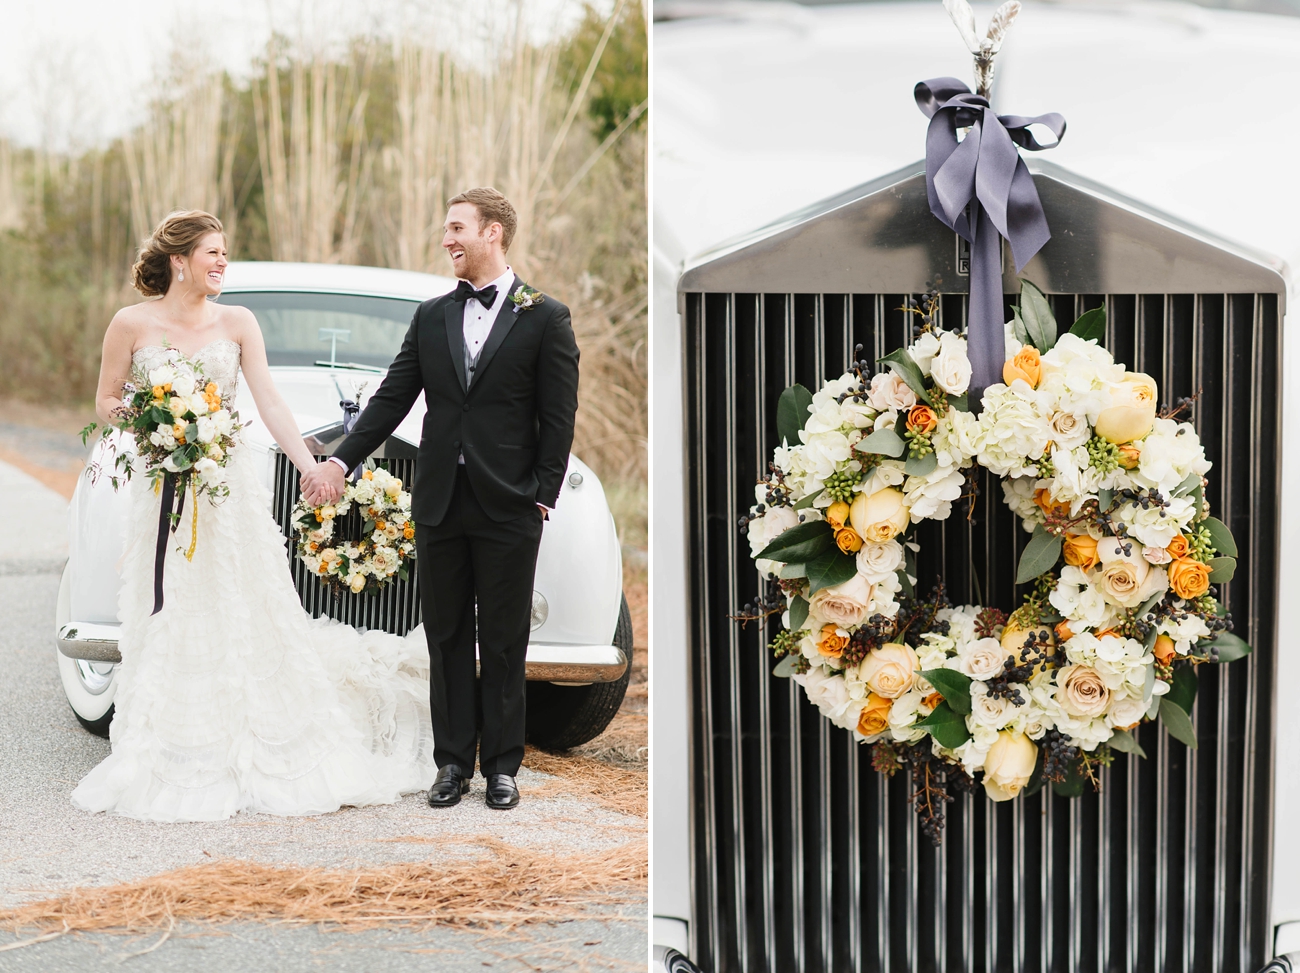 Chesapeake Bay Beach Club Wedding by Natalie Franke | Vintage Wedding Car, Ruffled Gown, and Flowing Bouquet with Orange, Yellow, and Navy Blue Tones.